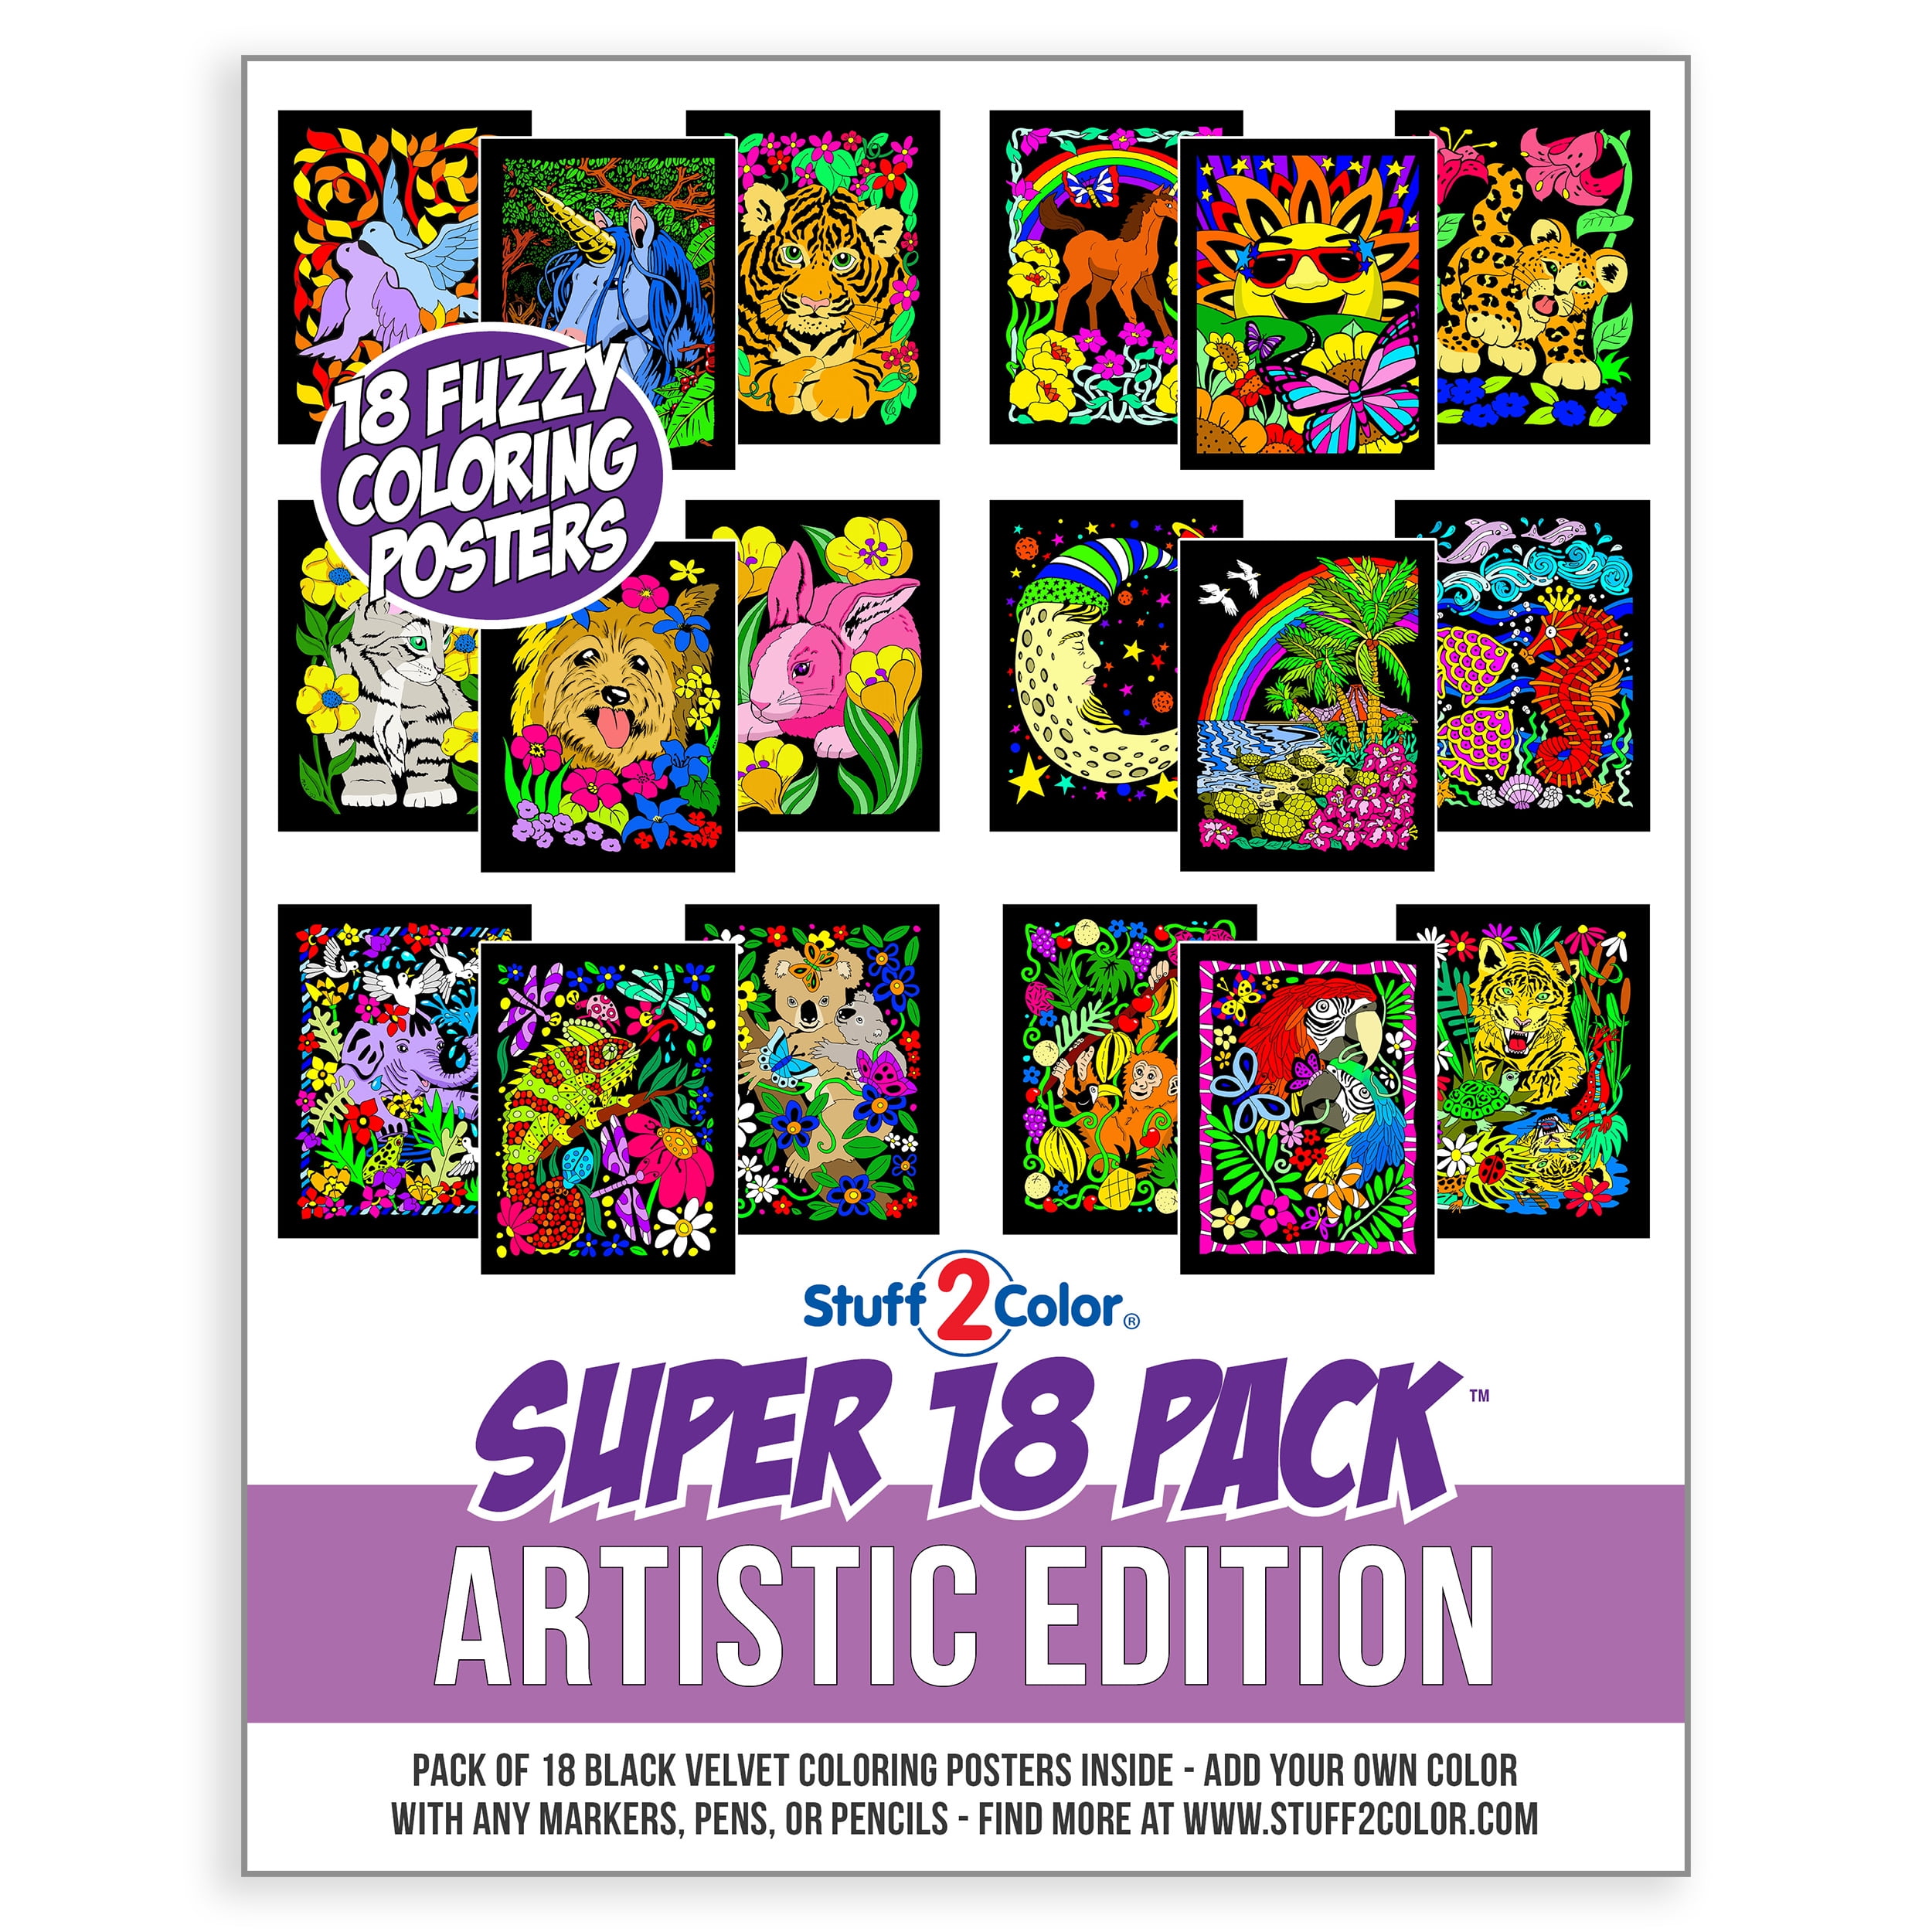 Super Pack of 18 Fuzzy Velvet Coloring Posters (Artistic Edition) -  Stuff2Color